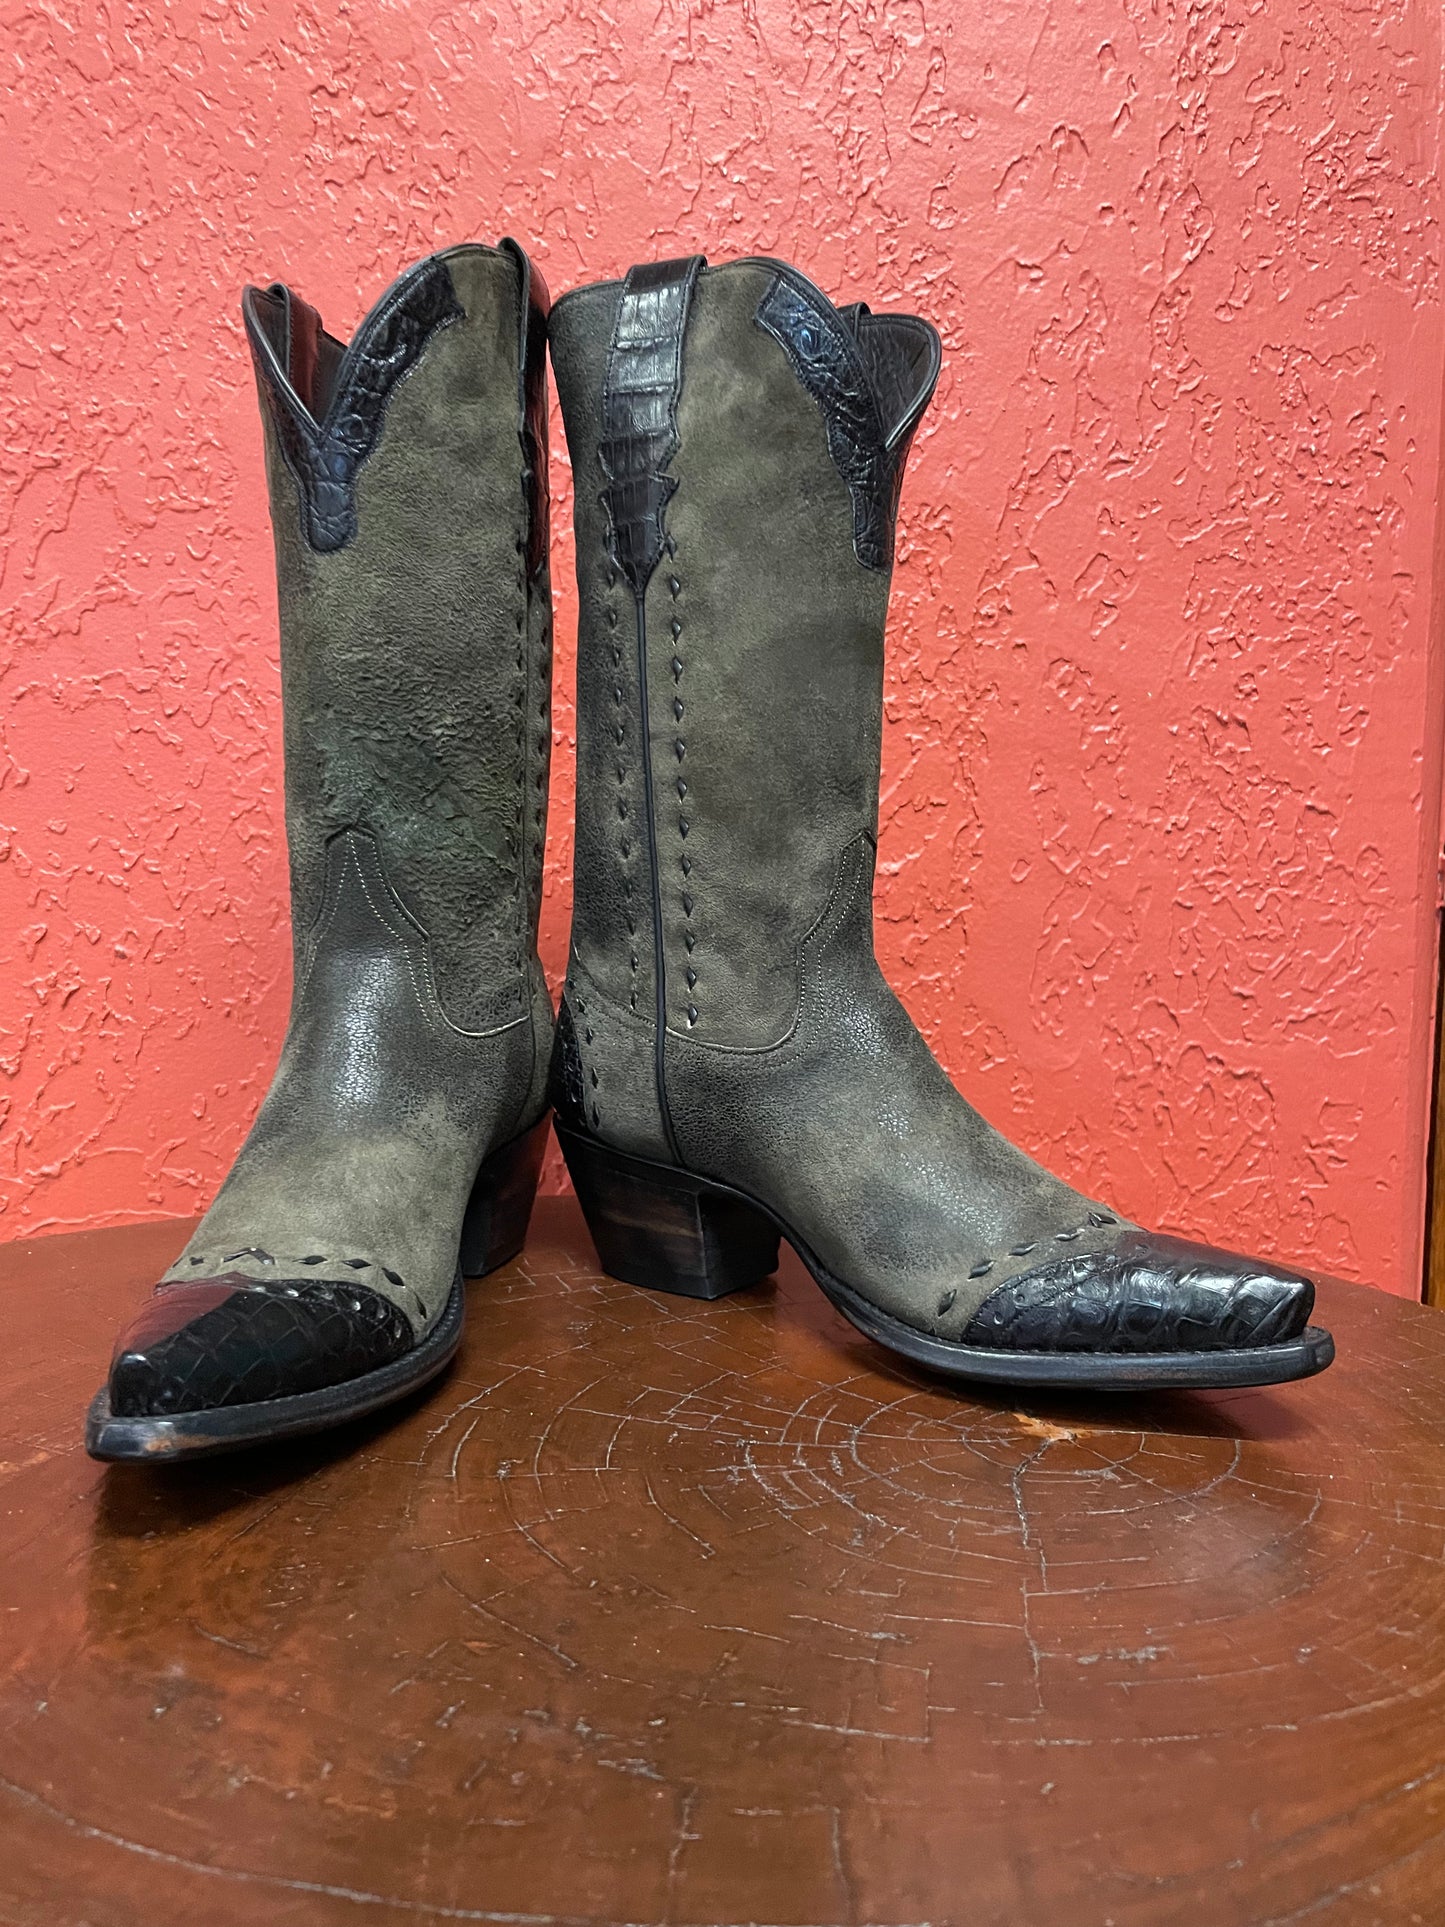 Vintage Olive Goatskin Roughout With Caiman Trim